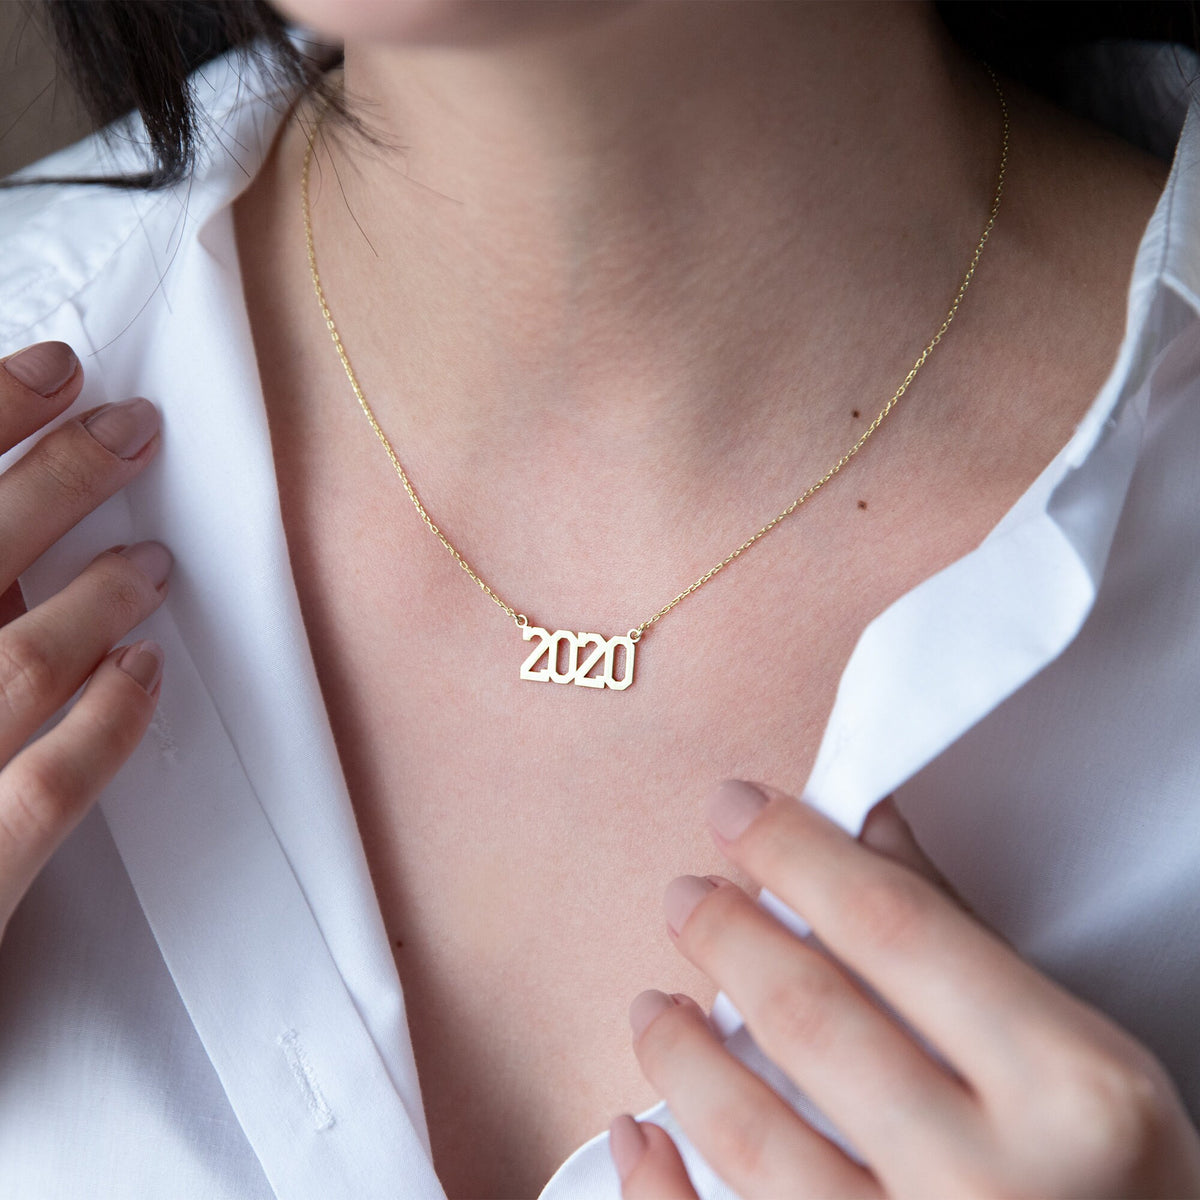 Number Necklace • Personalized Gift for Her • Gold Number Pendant • Sports Number Necklace • Number Year Necklace • Sport Jewelry • Baseball